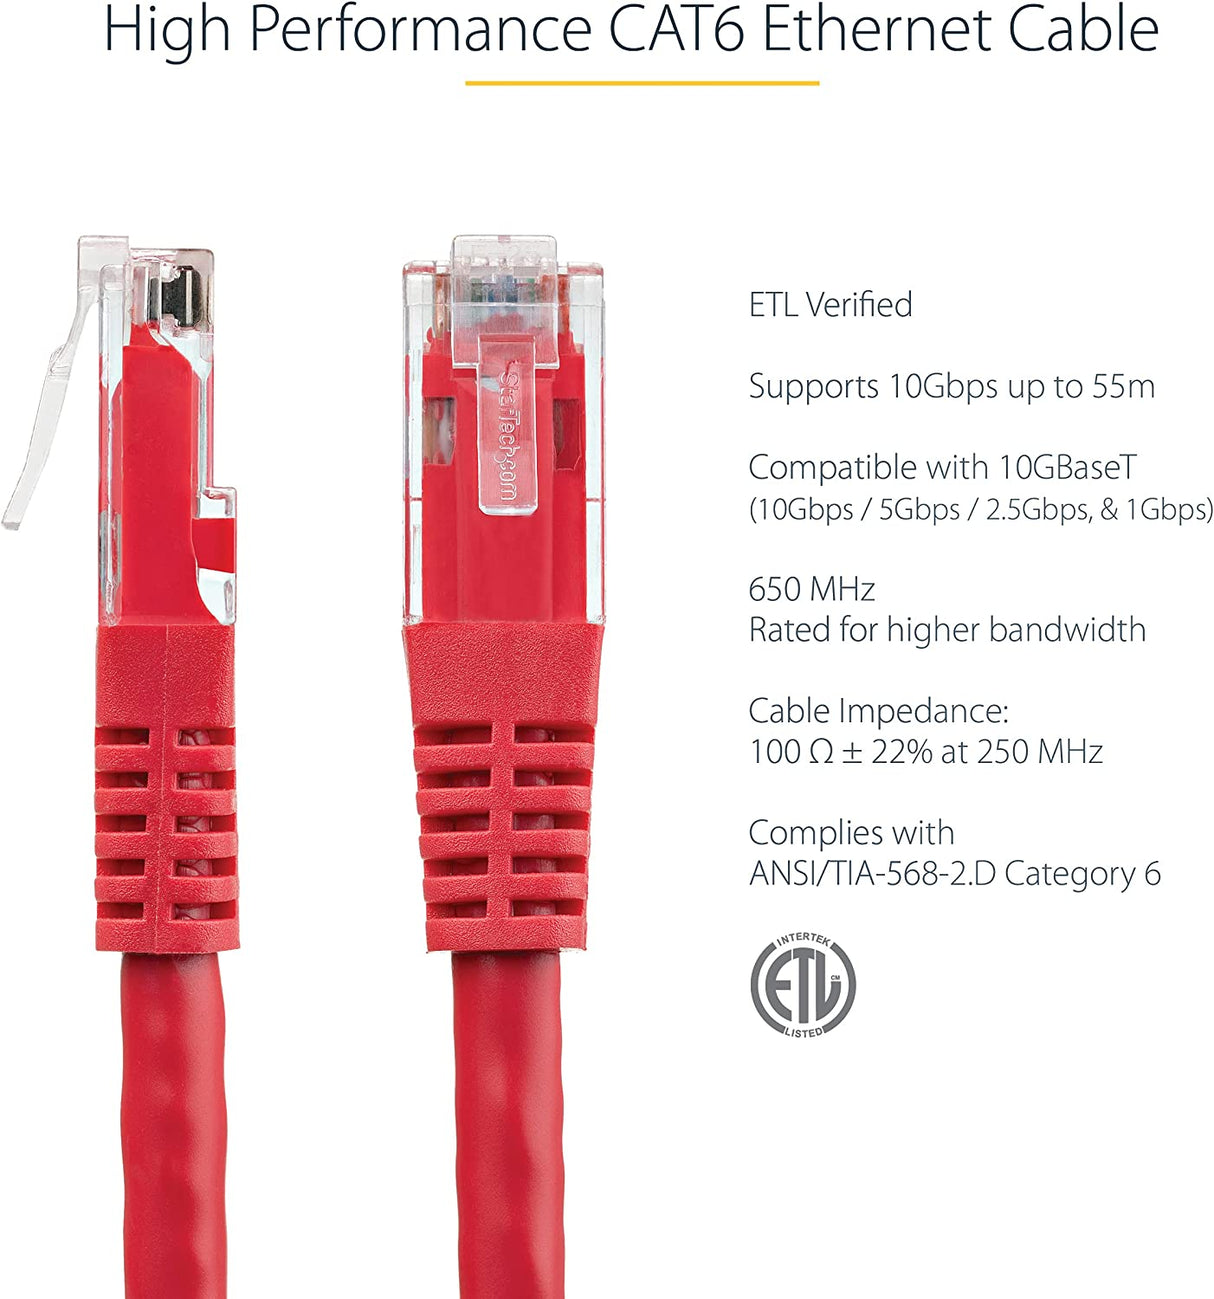 StarTech.com 20ft CAT6 Ethernet Cable - Red CAT 6 Gigabit Ethernet Wire -650MHz 100W PoE++ RJ45 UTP Molded Category 6 Network/Patch Cord w/Strain Relief/Fluke Tested UL/TIA Certified (C6PATCH20RD) Red 20 ft/6.1 m